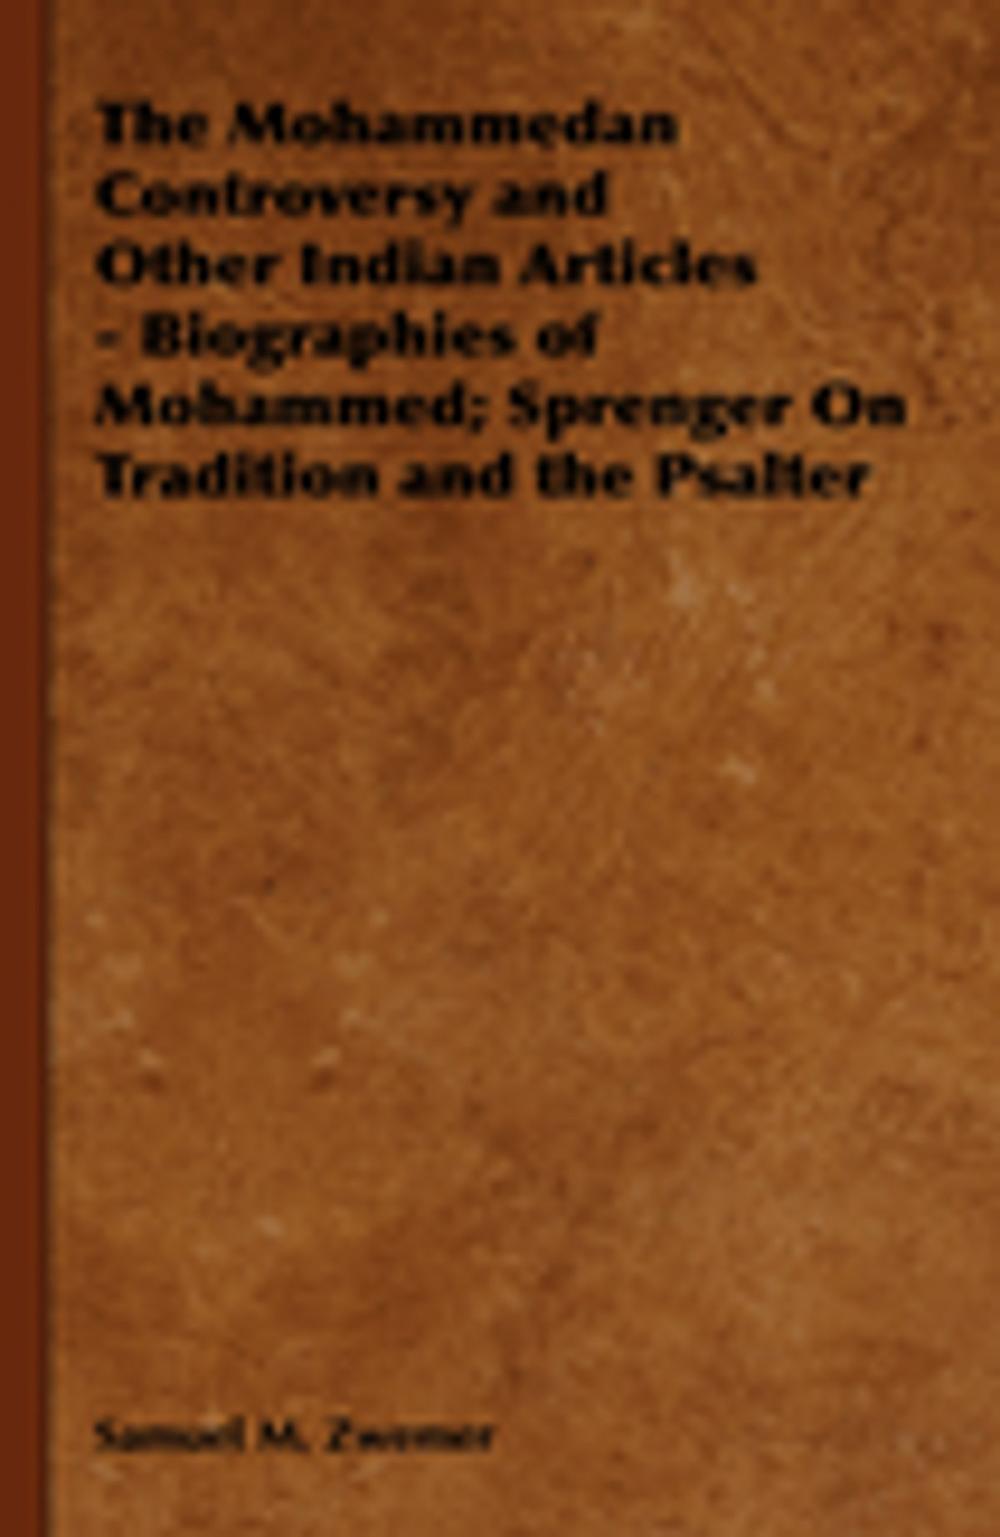 Big bigCover of The Mohammedan Controversy and Other Indian Articles - Biographies of Mohammed; Sprenger On Tradition and the Psalter